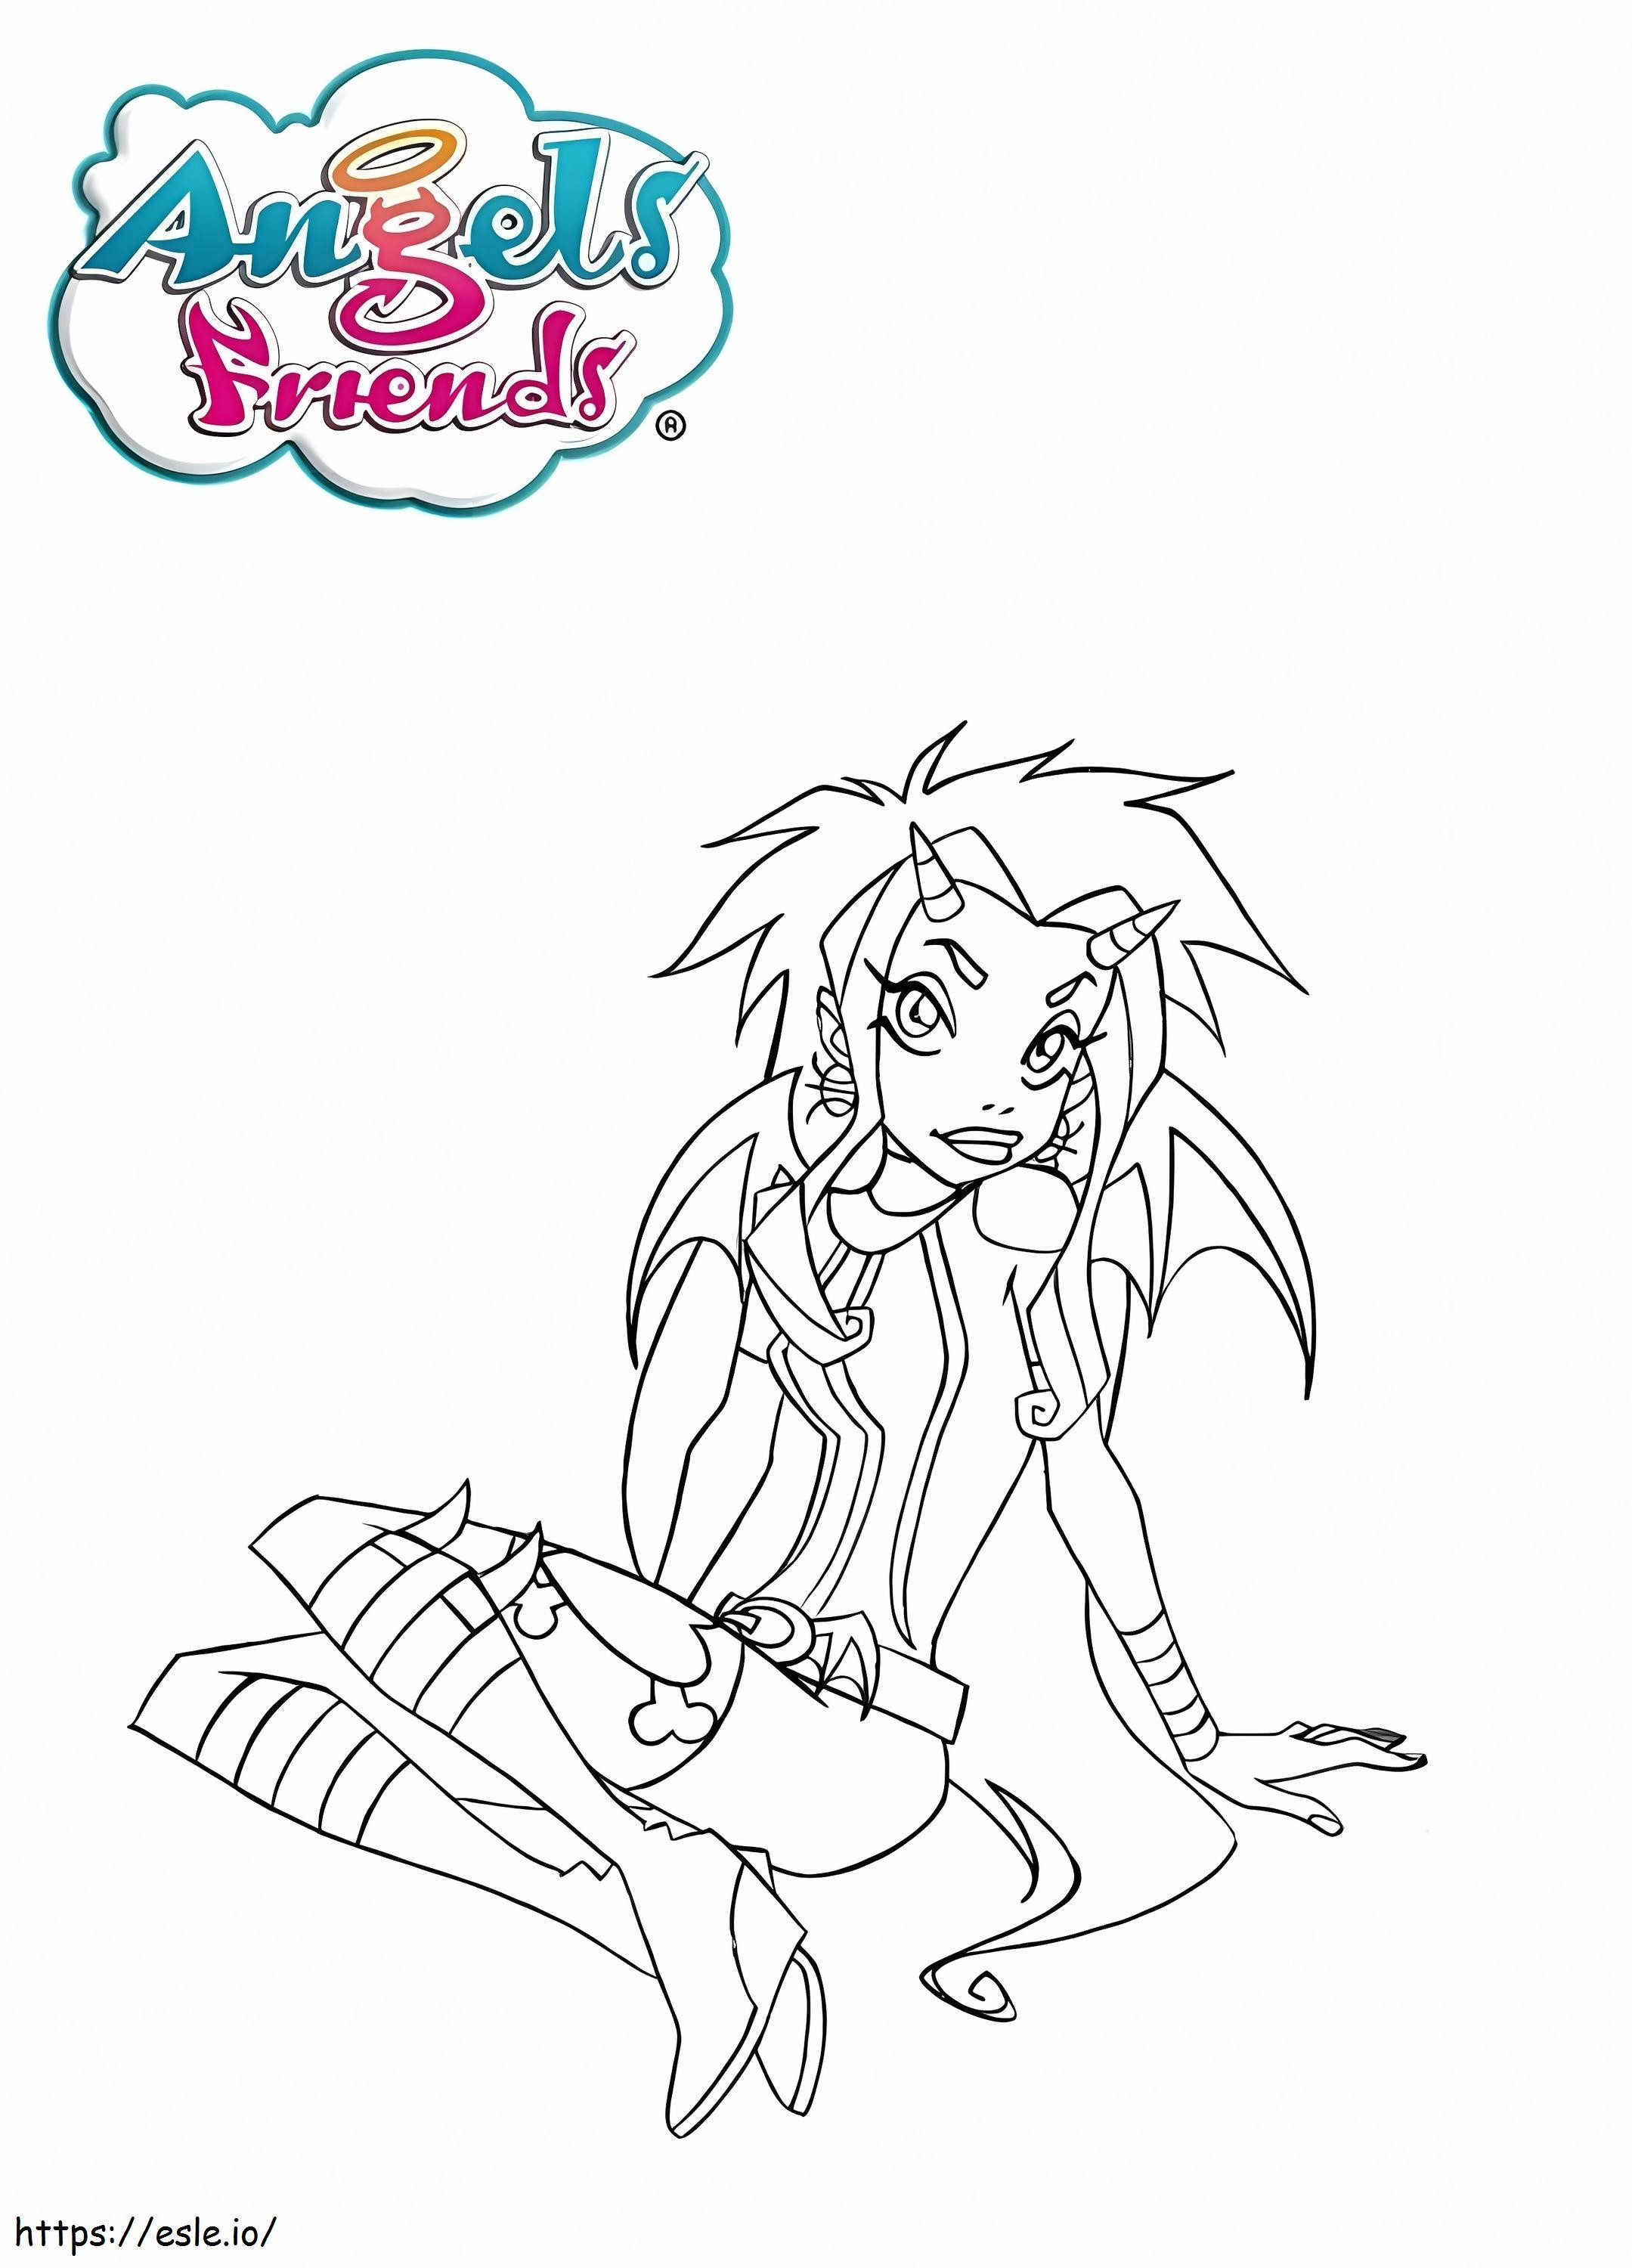 Angels Friends 2 coloring page